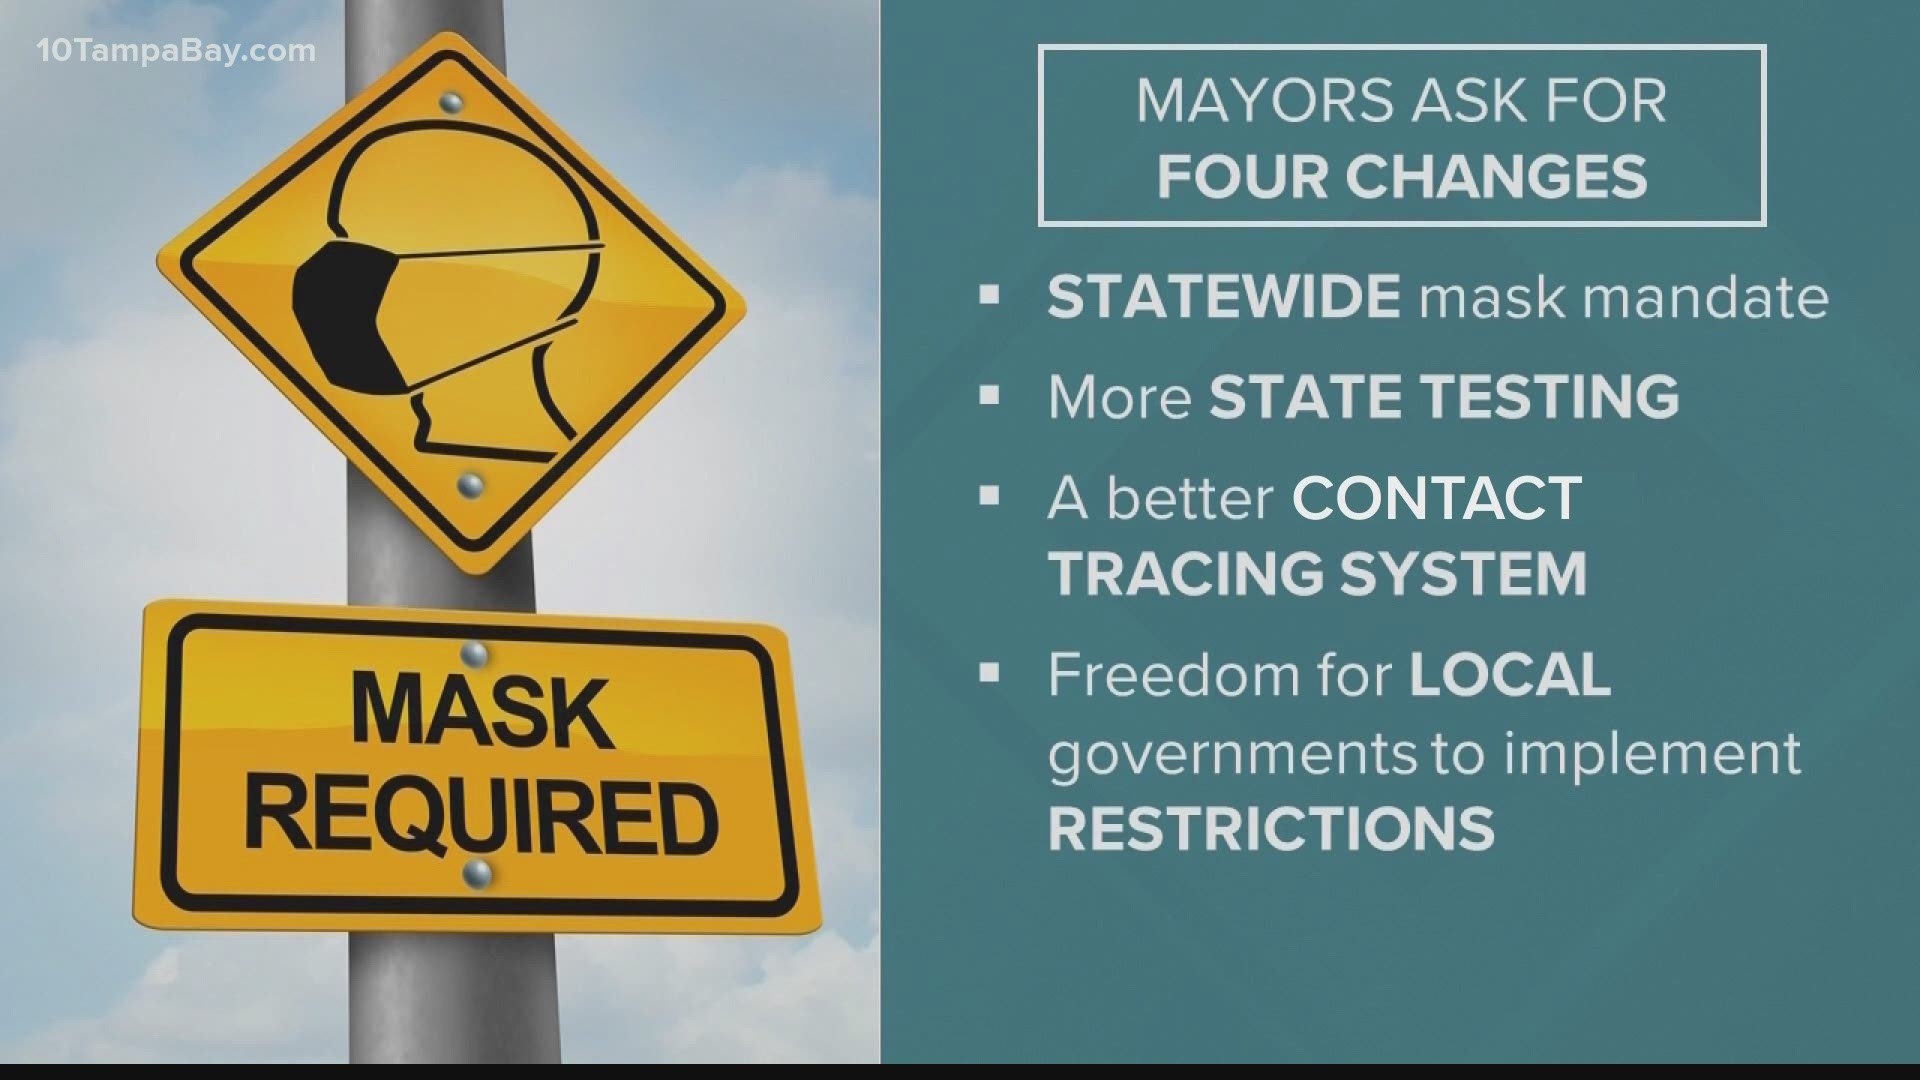 The mayors asked Gov. Ron DeSantis for 4 things: A statewide mask mandate, more state testing, a better contact tracing system, and more freedom for local government